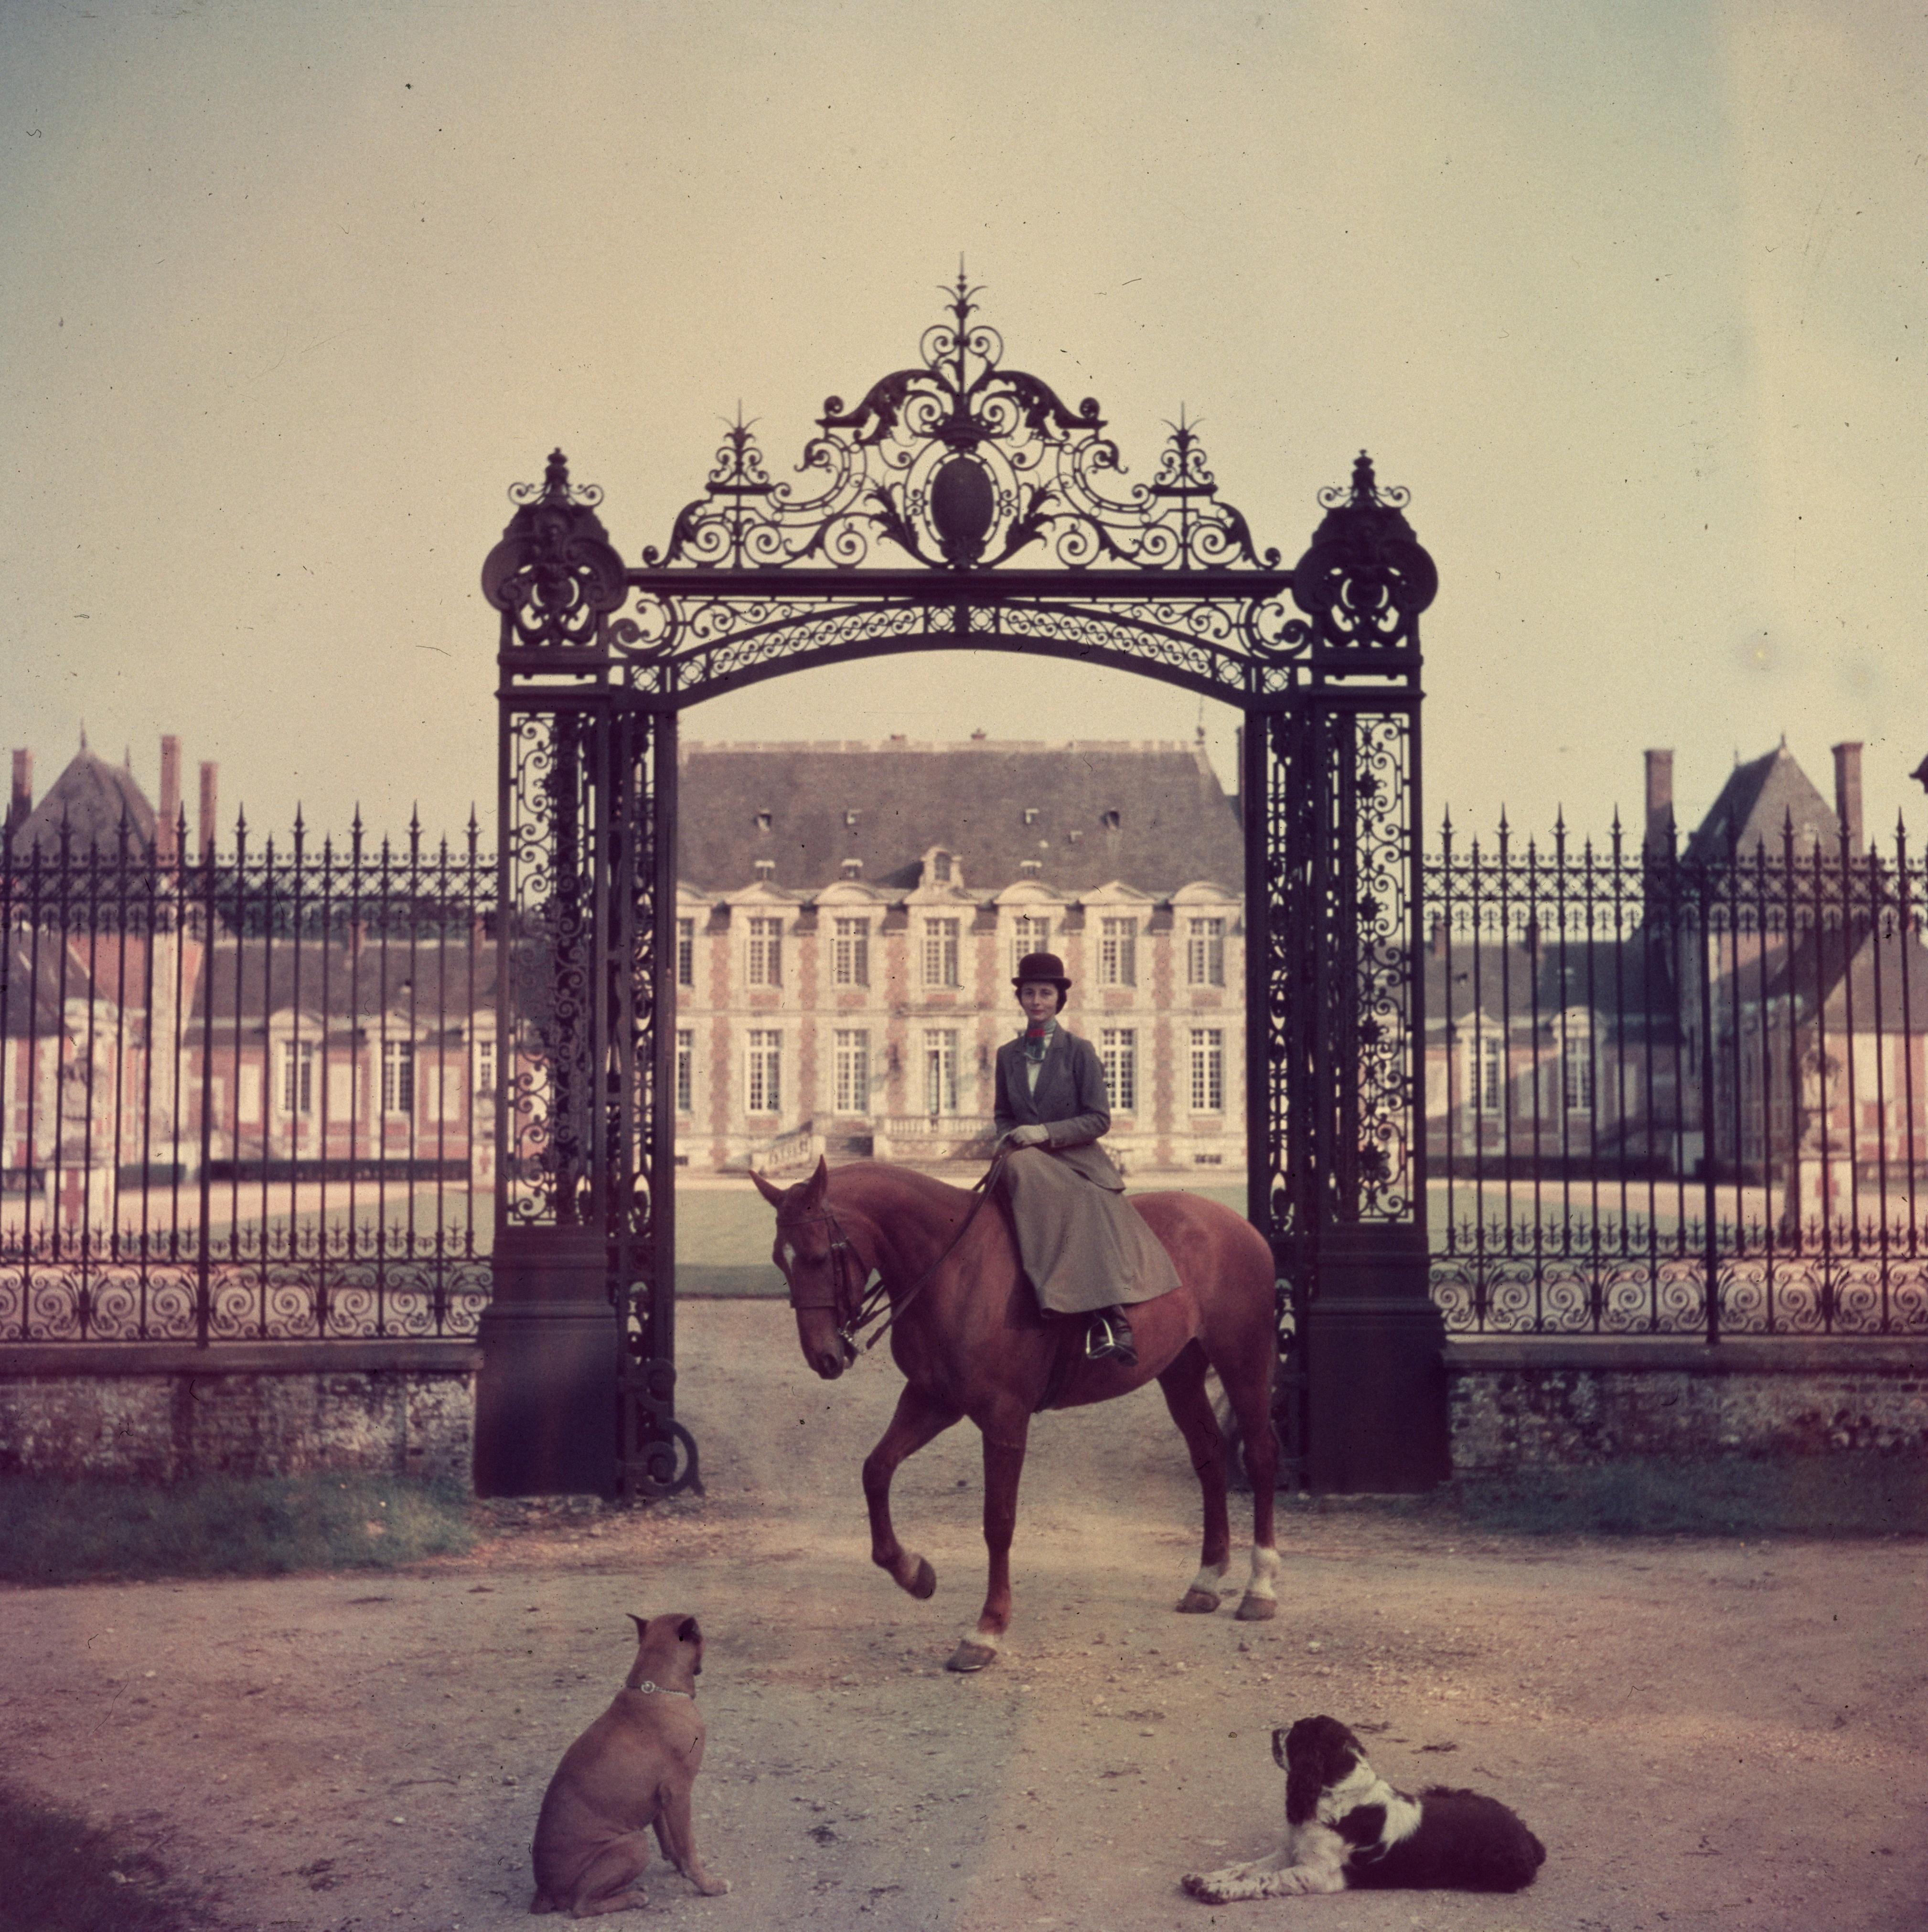 'Equestrian Entrance' Slim Aarons Limited Edition Estate Stamped Print

1957 Madame de la Haye-Jousselin on her horse at the gates to her chateau in Normandy. 


Produced from the original transparency
Certificate of authenticity supplied 
Archive